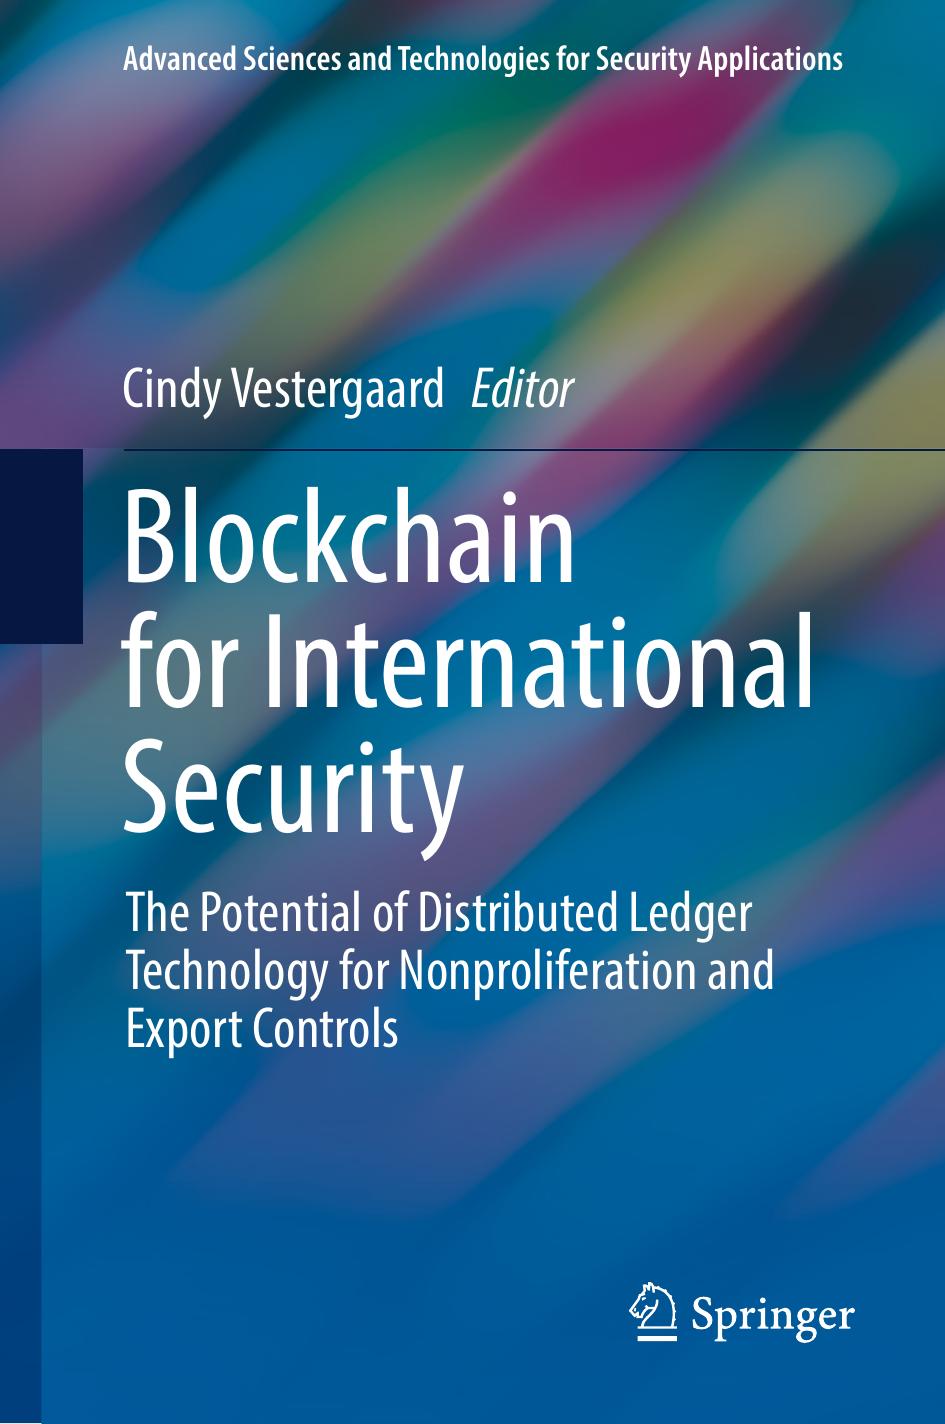 Blockchain for International Security: The Potential of Distributed Ledger Technology for Nonproliferation and Export Controls by Cindy Vestergaard